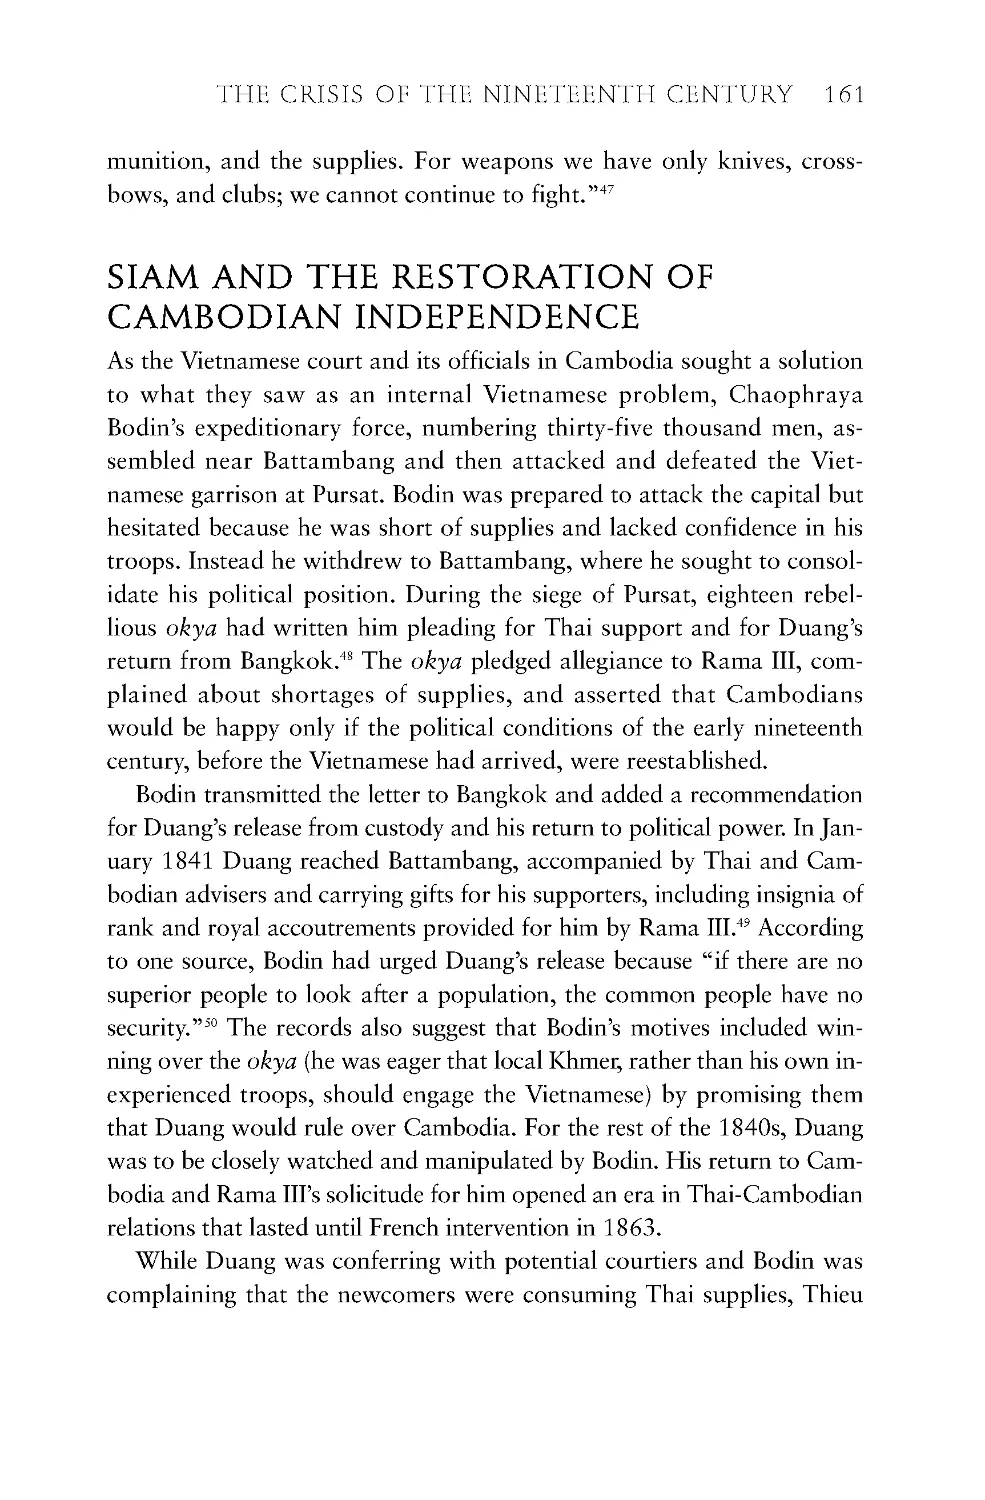 Siam and the Restoration of Cambodian Independence